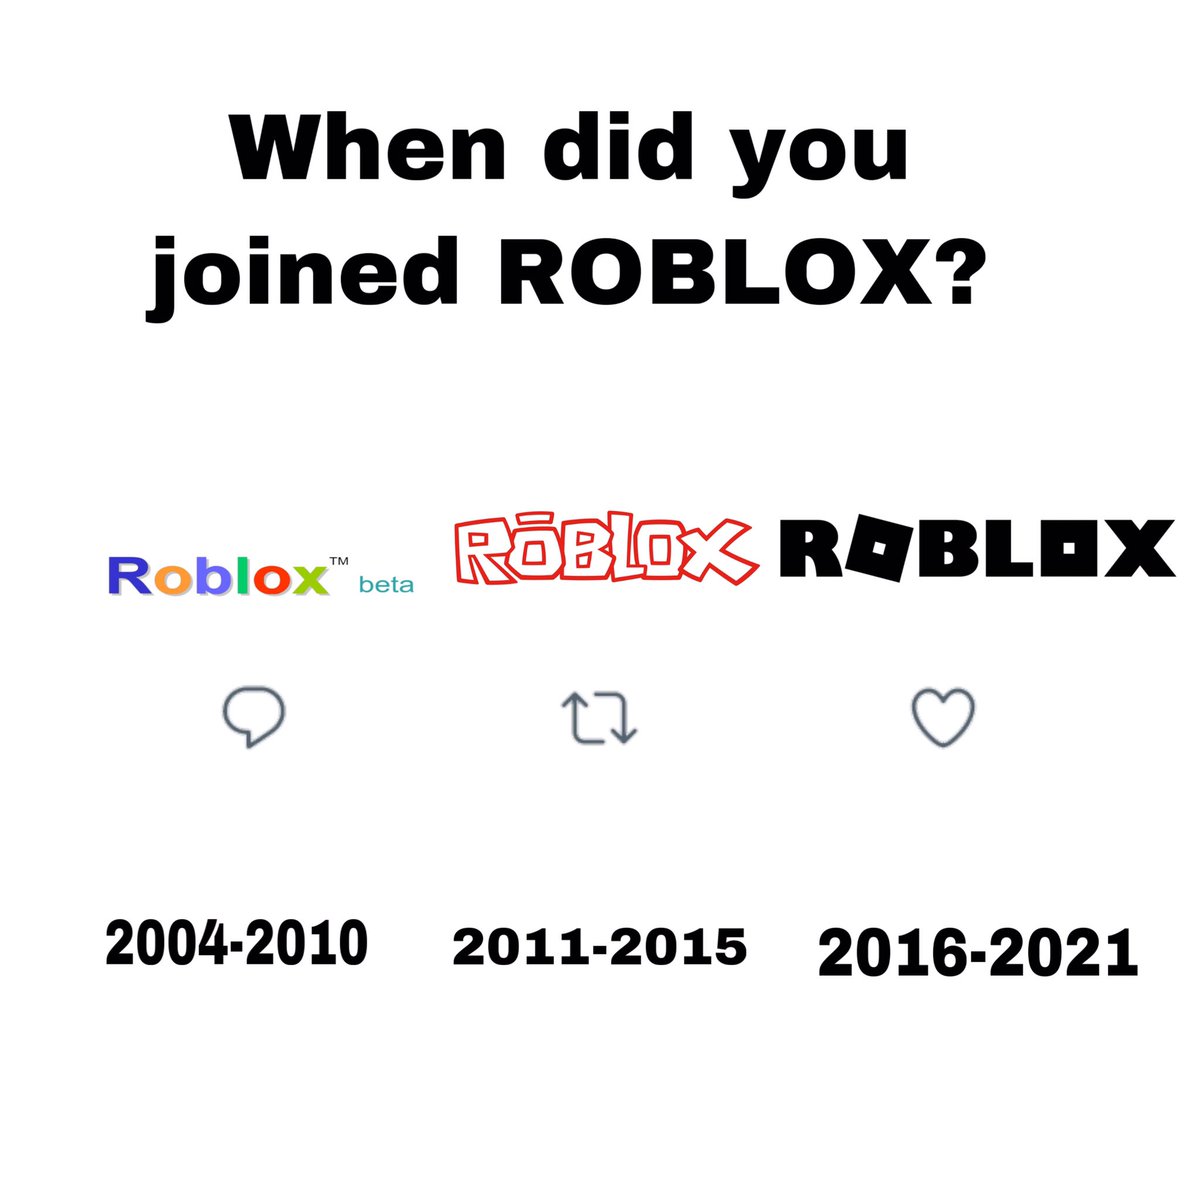 Model8197 on X: 💰$25 Robux Gift Card Giveaway! HOW TO ENTER